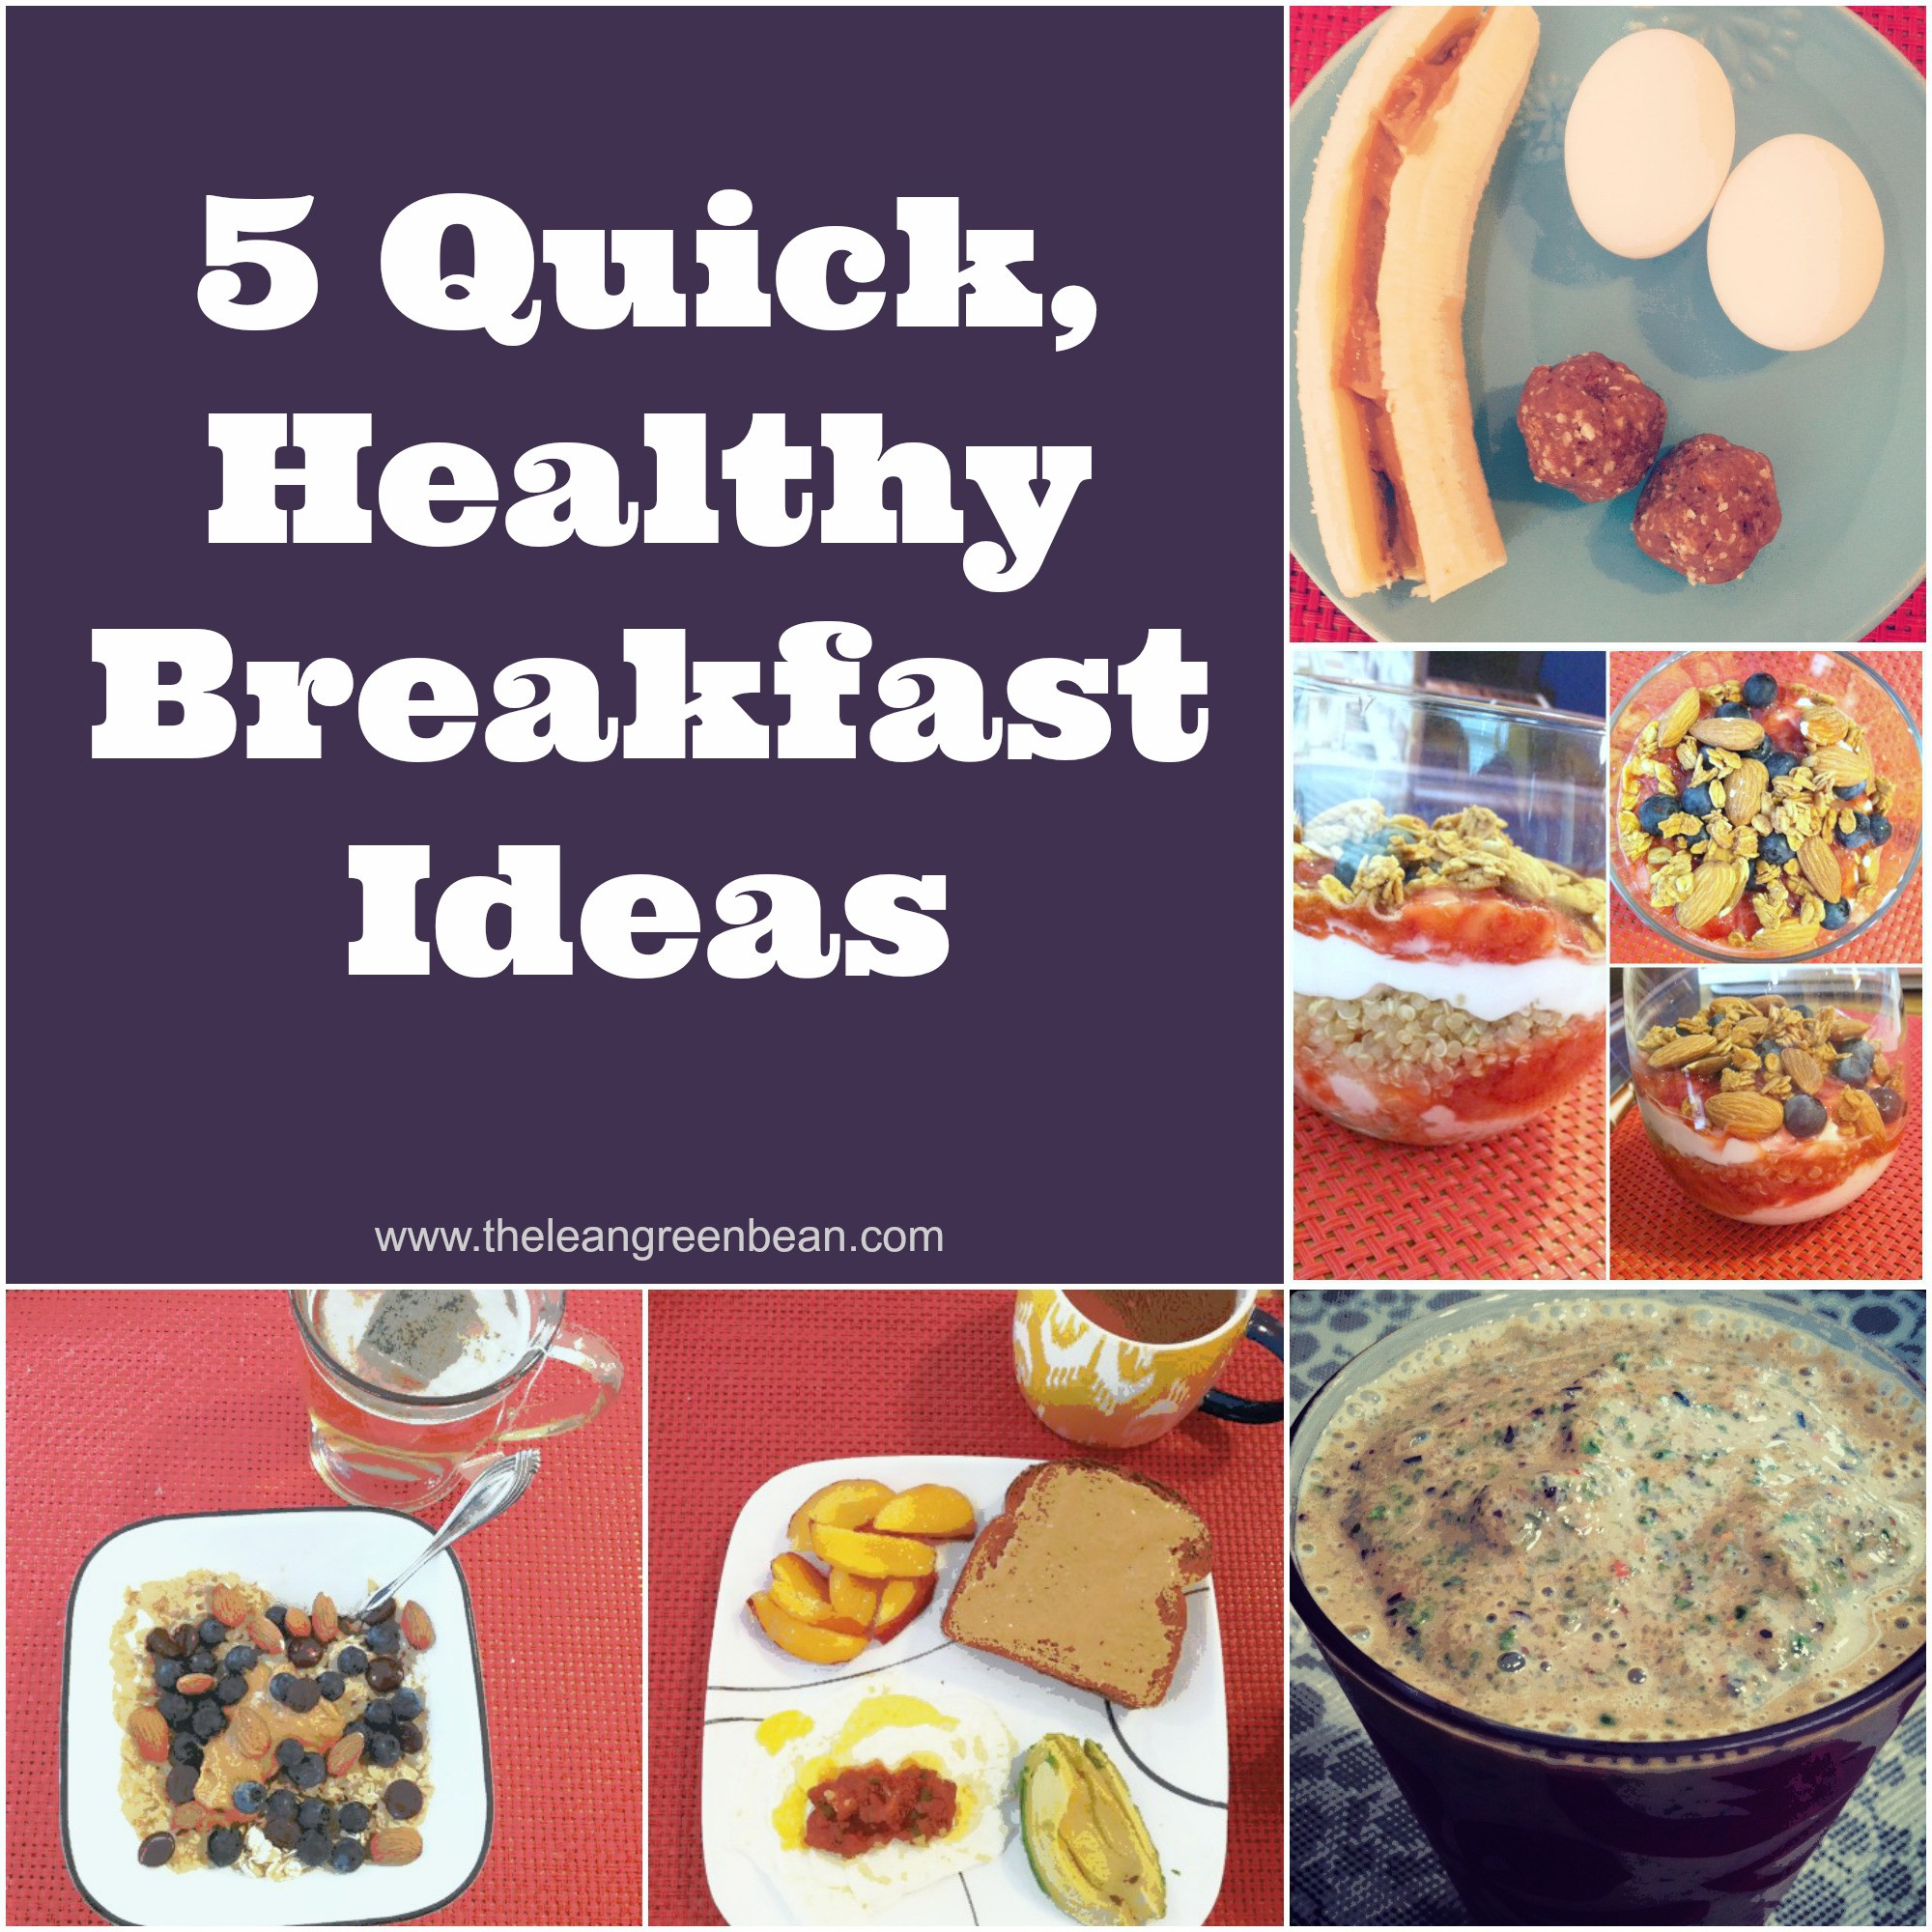 Quick Breakfast Recipes
 5 Quick Healthy Breakfast Ideas from a Registered Dietitian